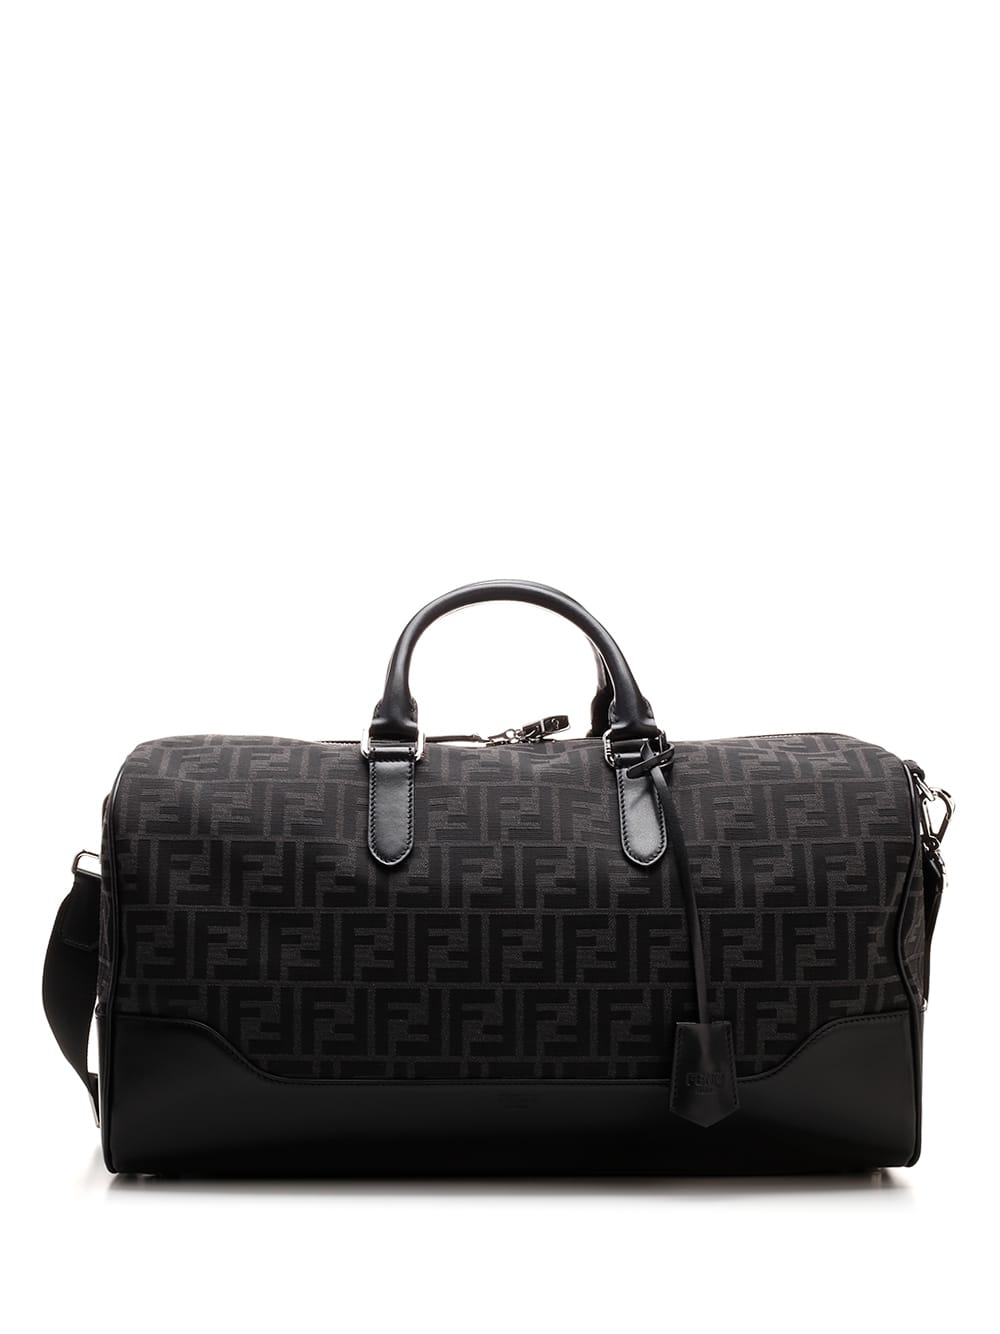 Travel Bag With All-over ff Monogram